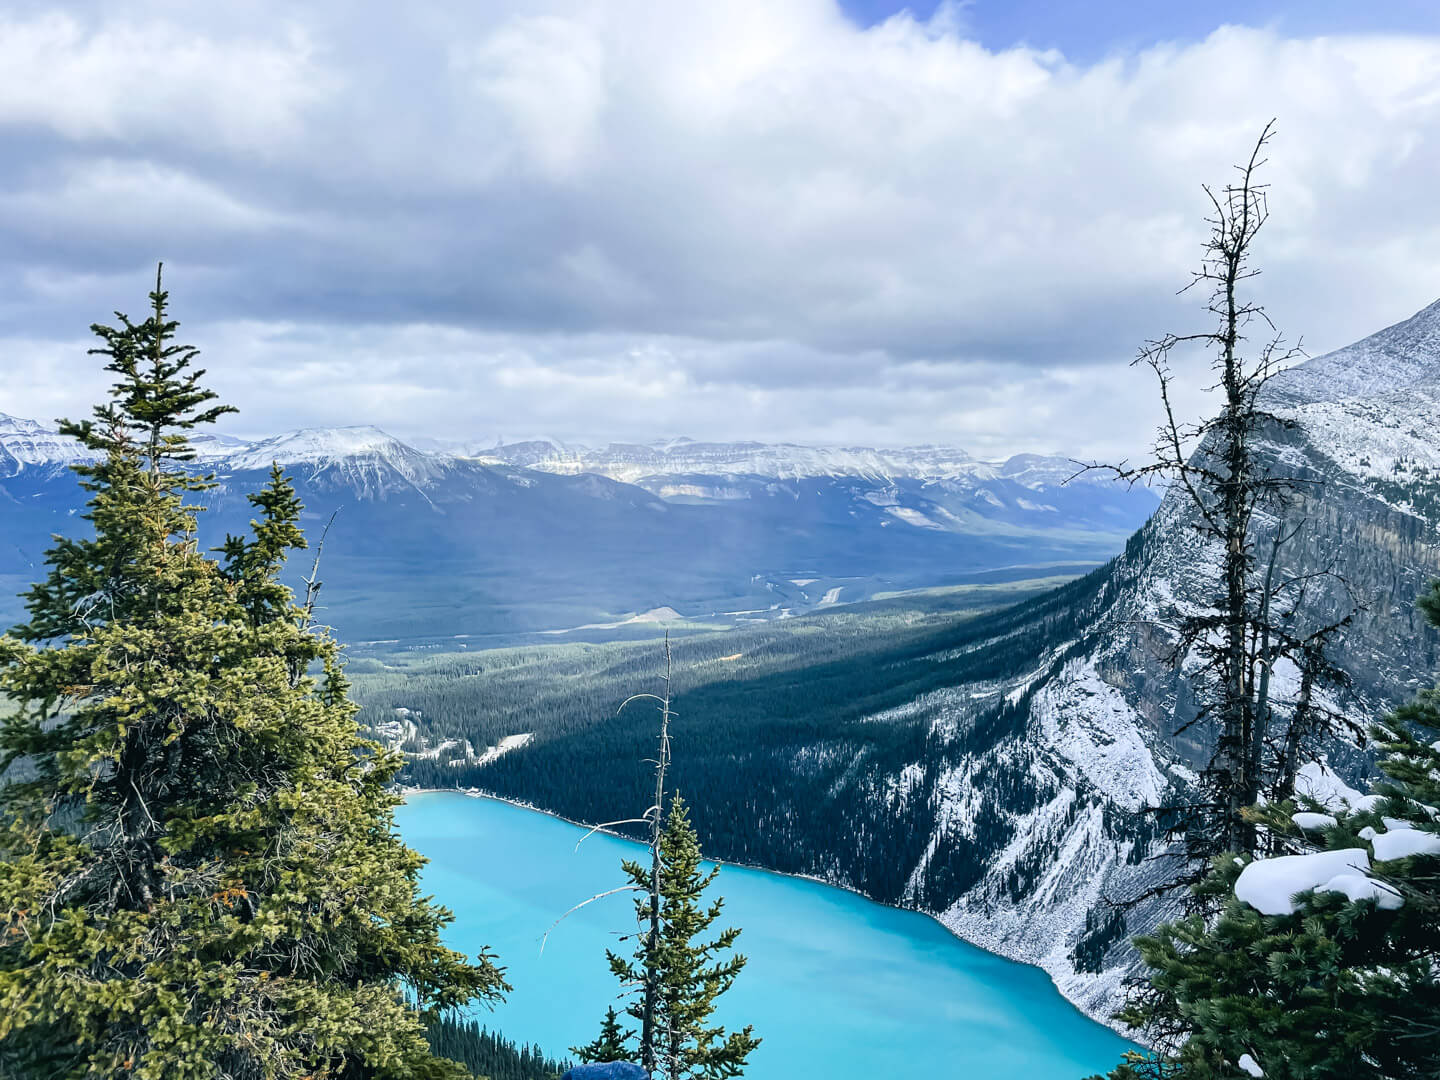 You are currently viewing Helpful Tips for Visiting Banff:  Know Before You Go